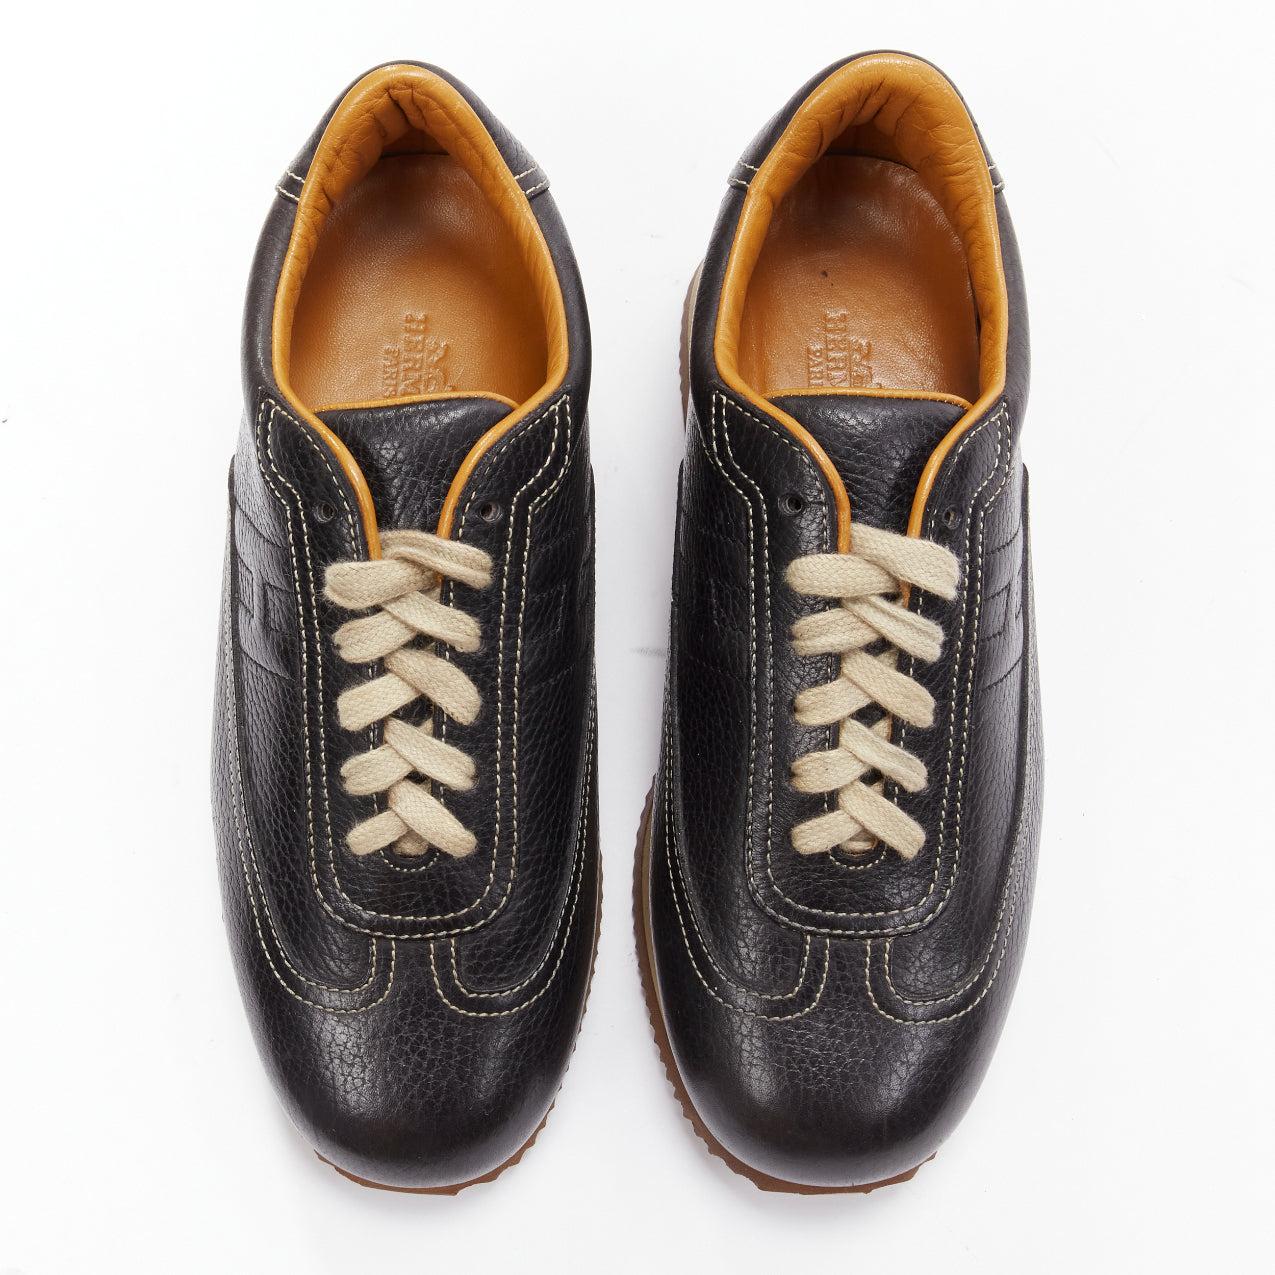 HERMES Quick black calfskin leather H logo low sneakers EU37.5
Reference: GIYG/A00363
Brand: Hermes
Model: Quick
Material: Leather
Color: Black, Brown
Pattern: Solid
Closure: Lace Up
Lining: Brown Leather
Extra Details: HERMES Calfskin Womens Quick